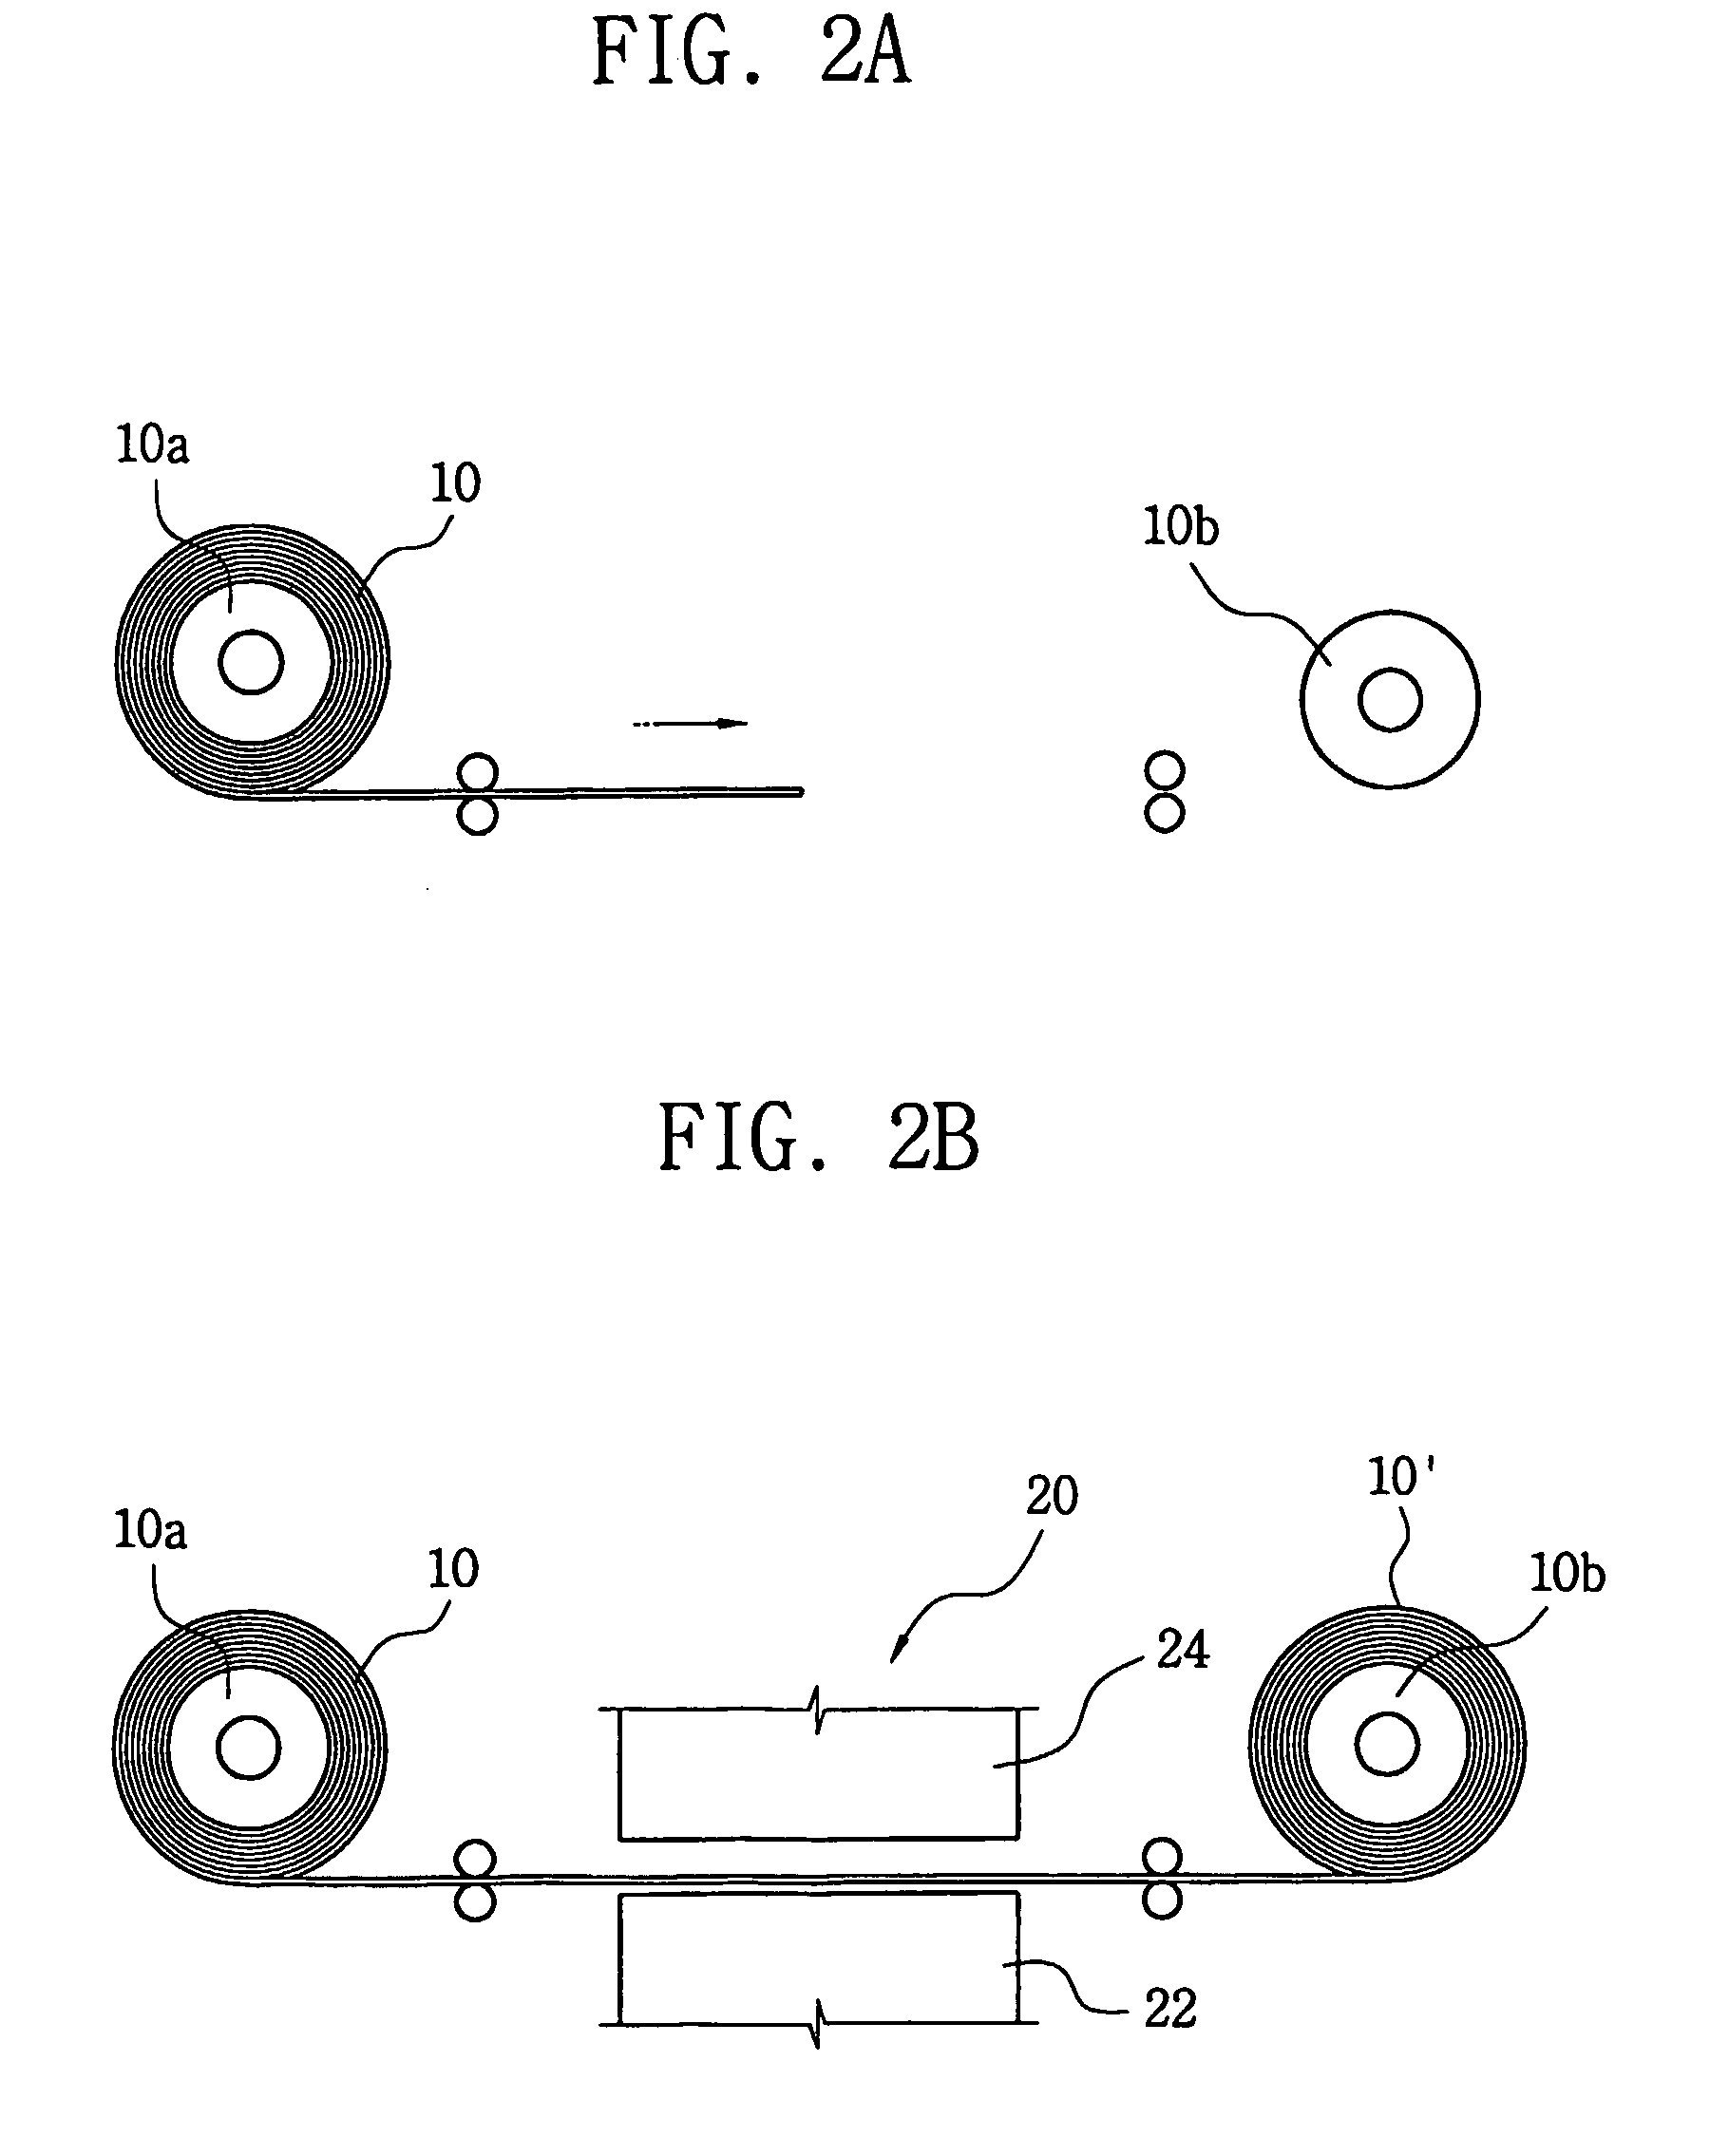 Method of producing fuses